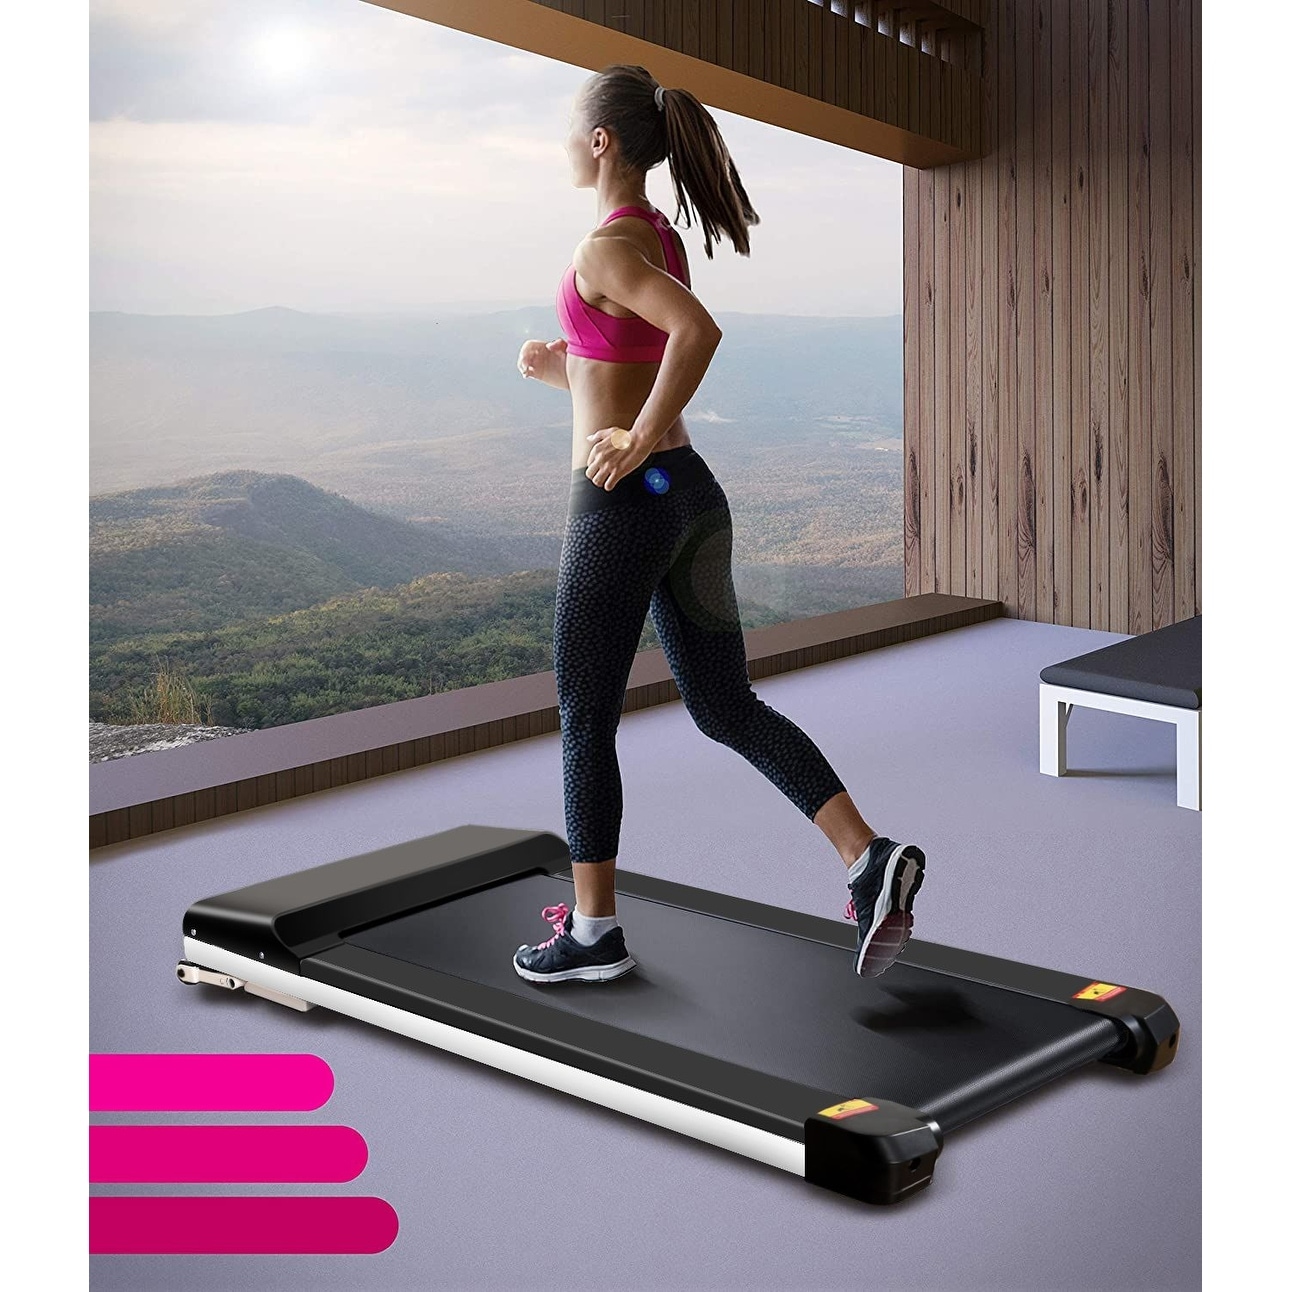 Easy to store flat treadmill suitable for home and gym